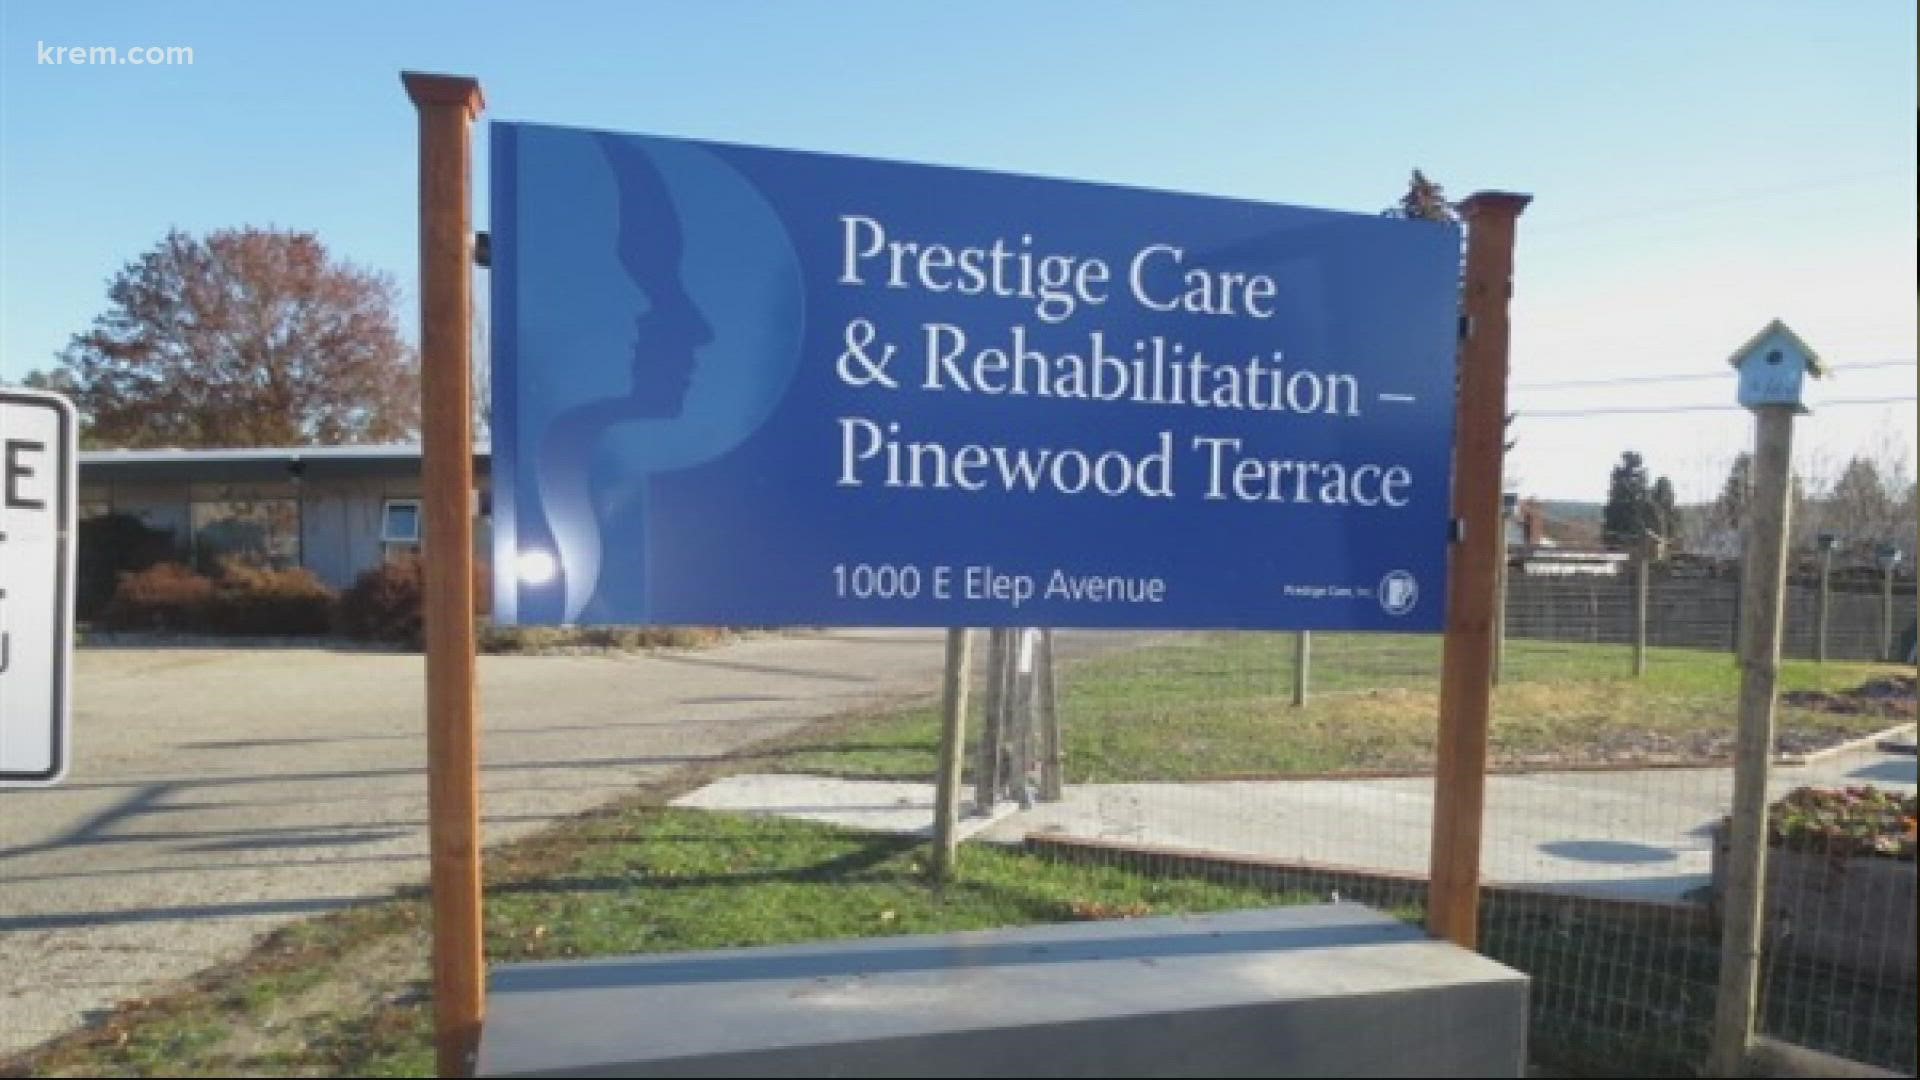 The first case was reported on Aug. 25 and spread quickly and infected 22 staff and 52 residents and Pinewood Terrace Nursing Center.